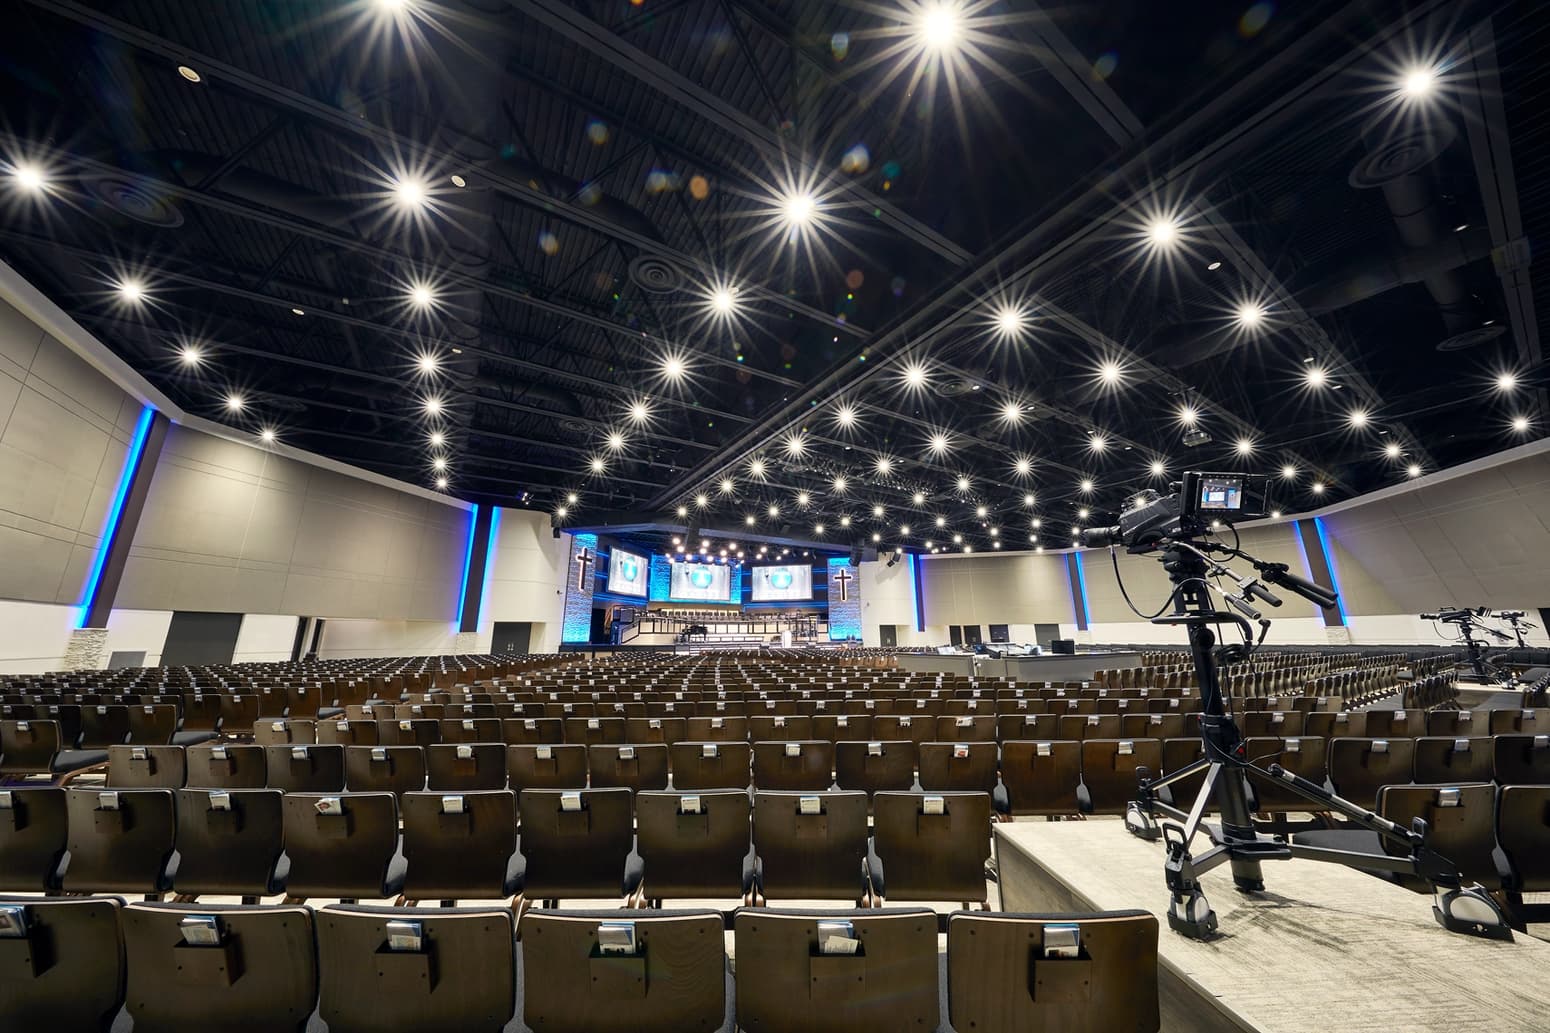 This shows the auditorium lighting systems we designed for First Baptist Church Naples.